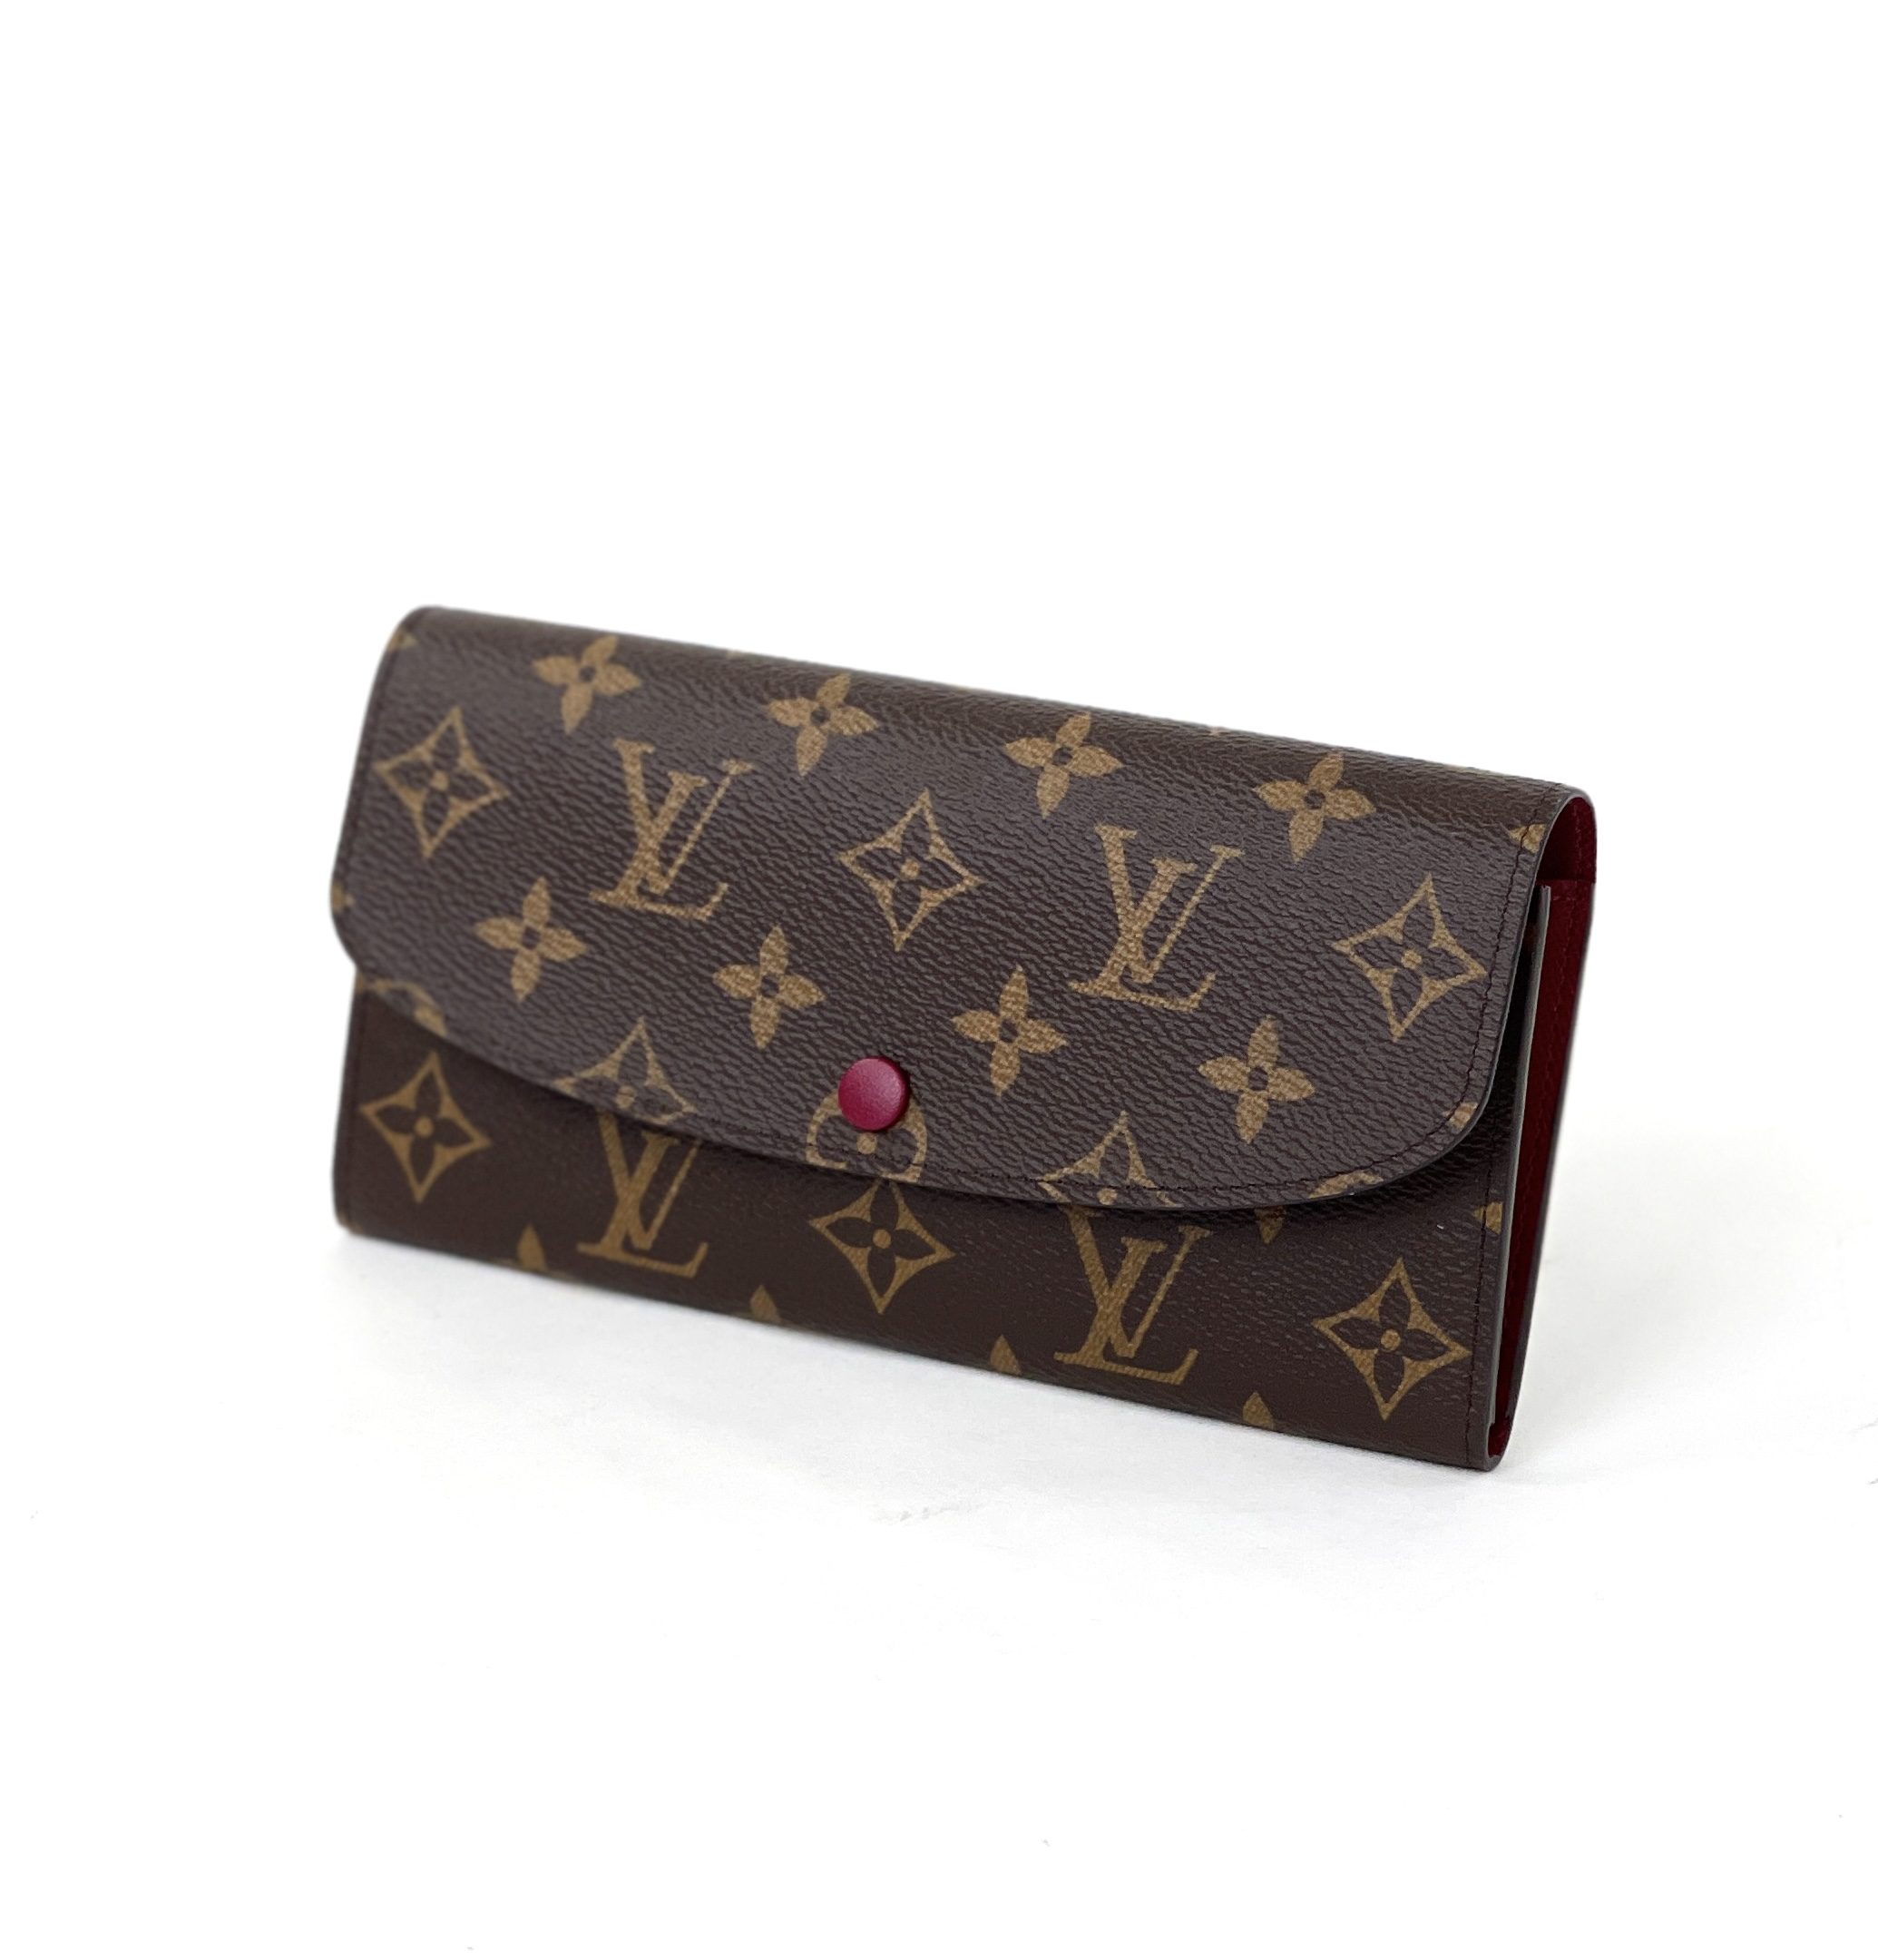 Louis Vuitton Monogram Emilie Wallet Red - A World Of Goods For You, LLC